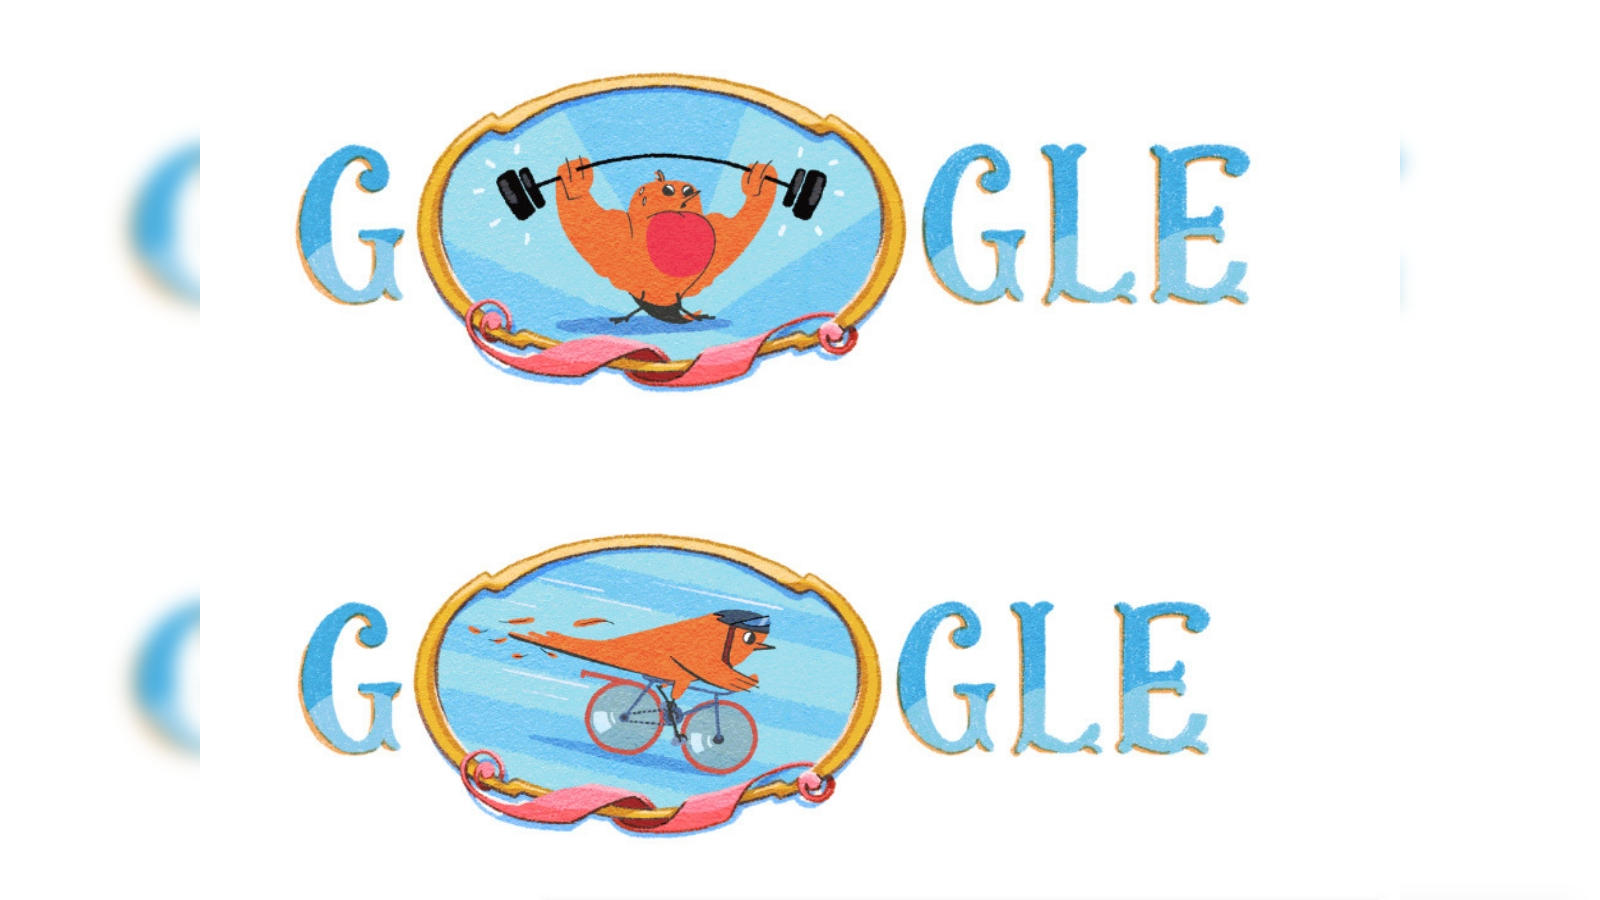 Winter Olympics Day 17 Google doodle marks the end of the 2018 games